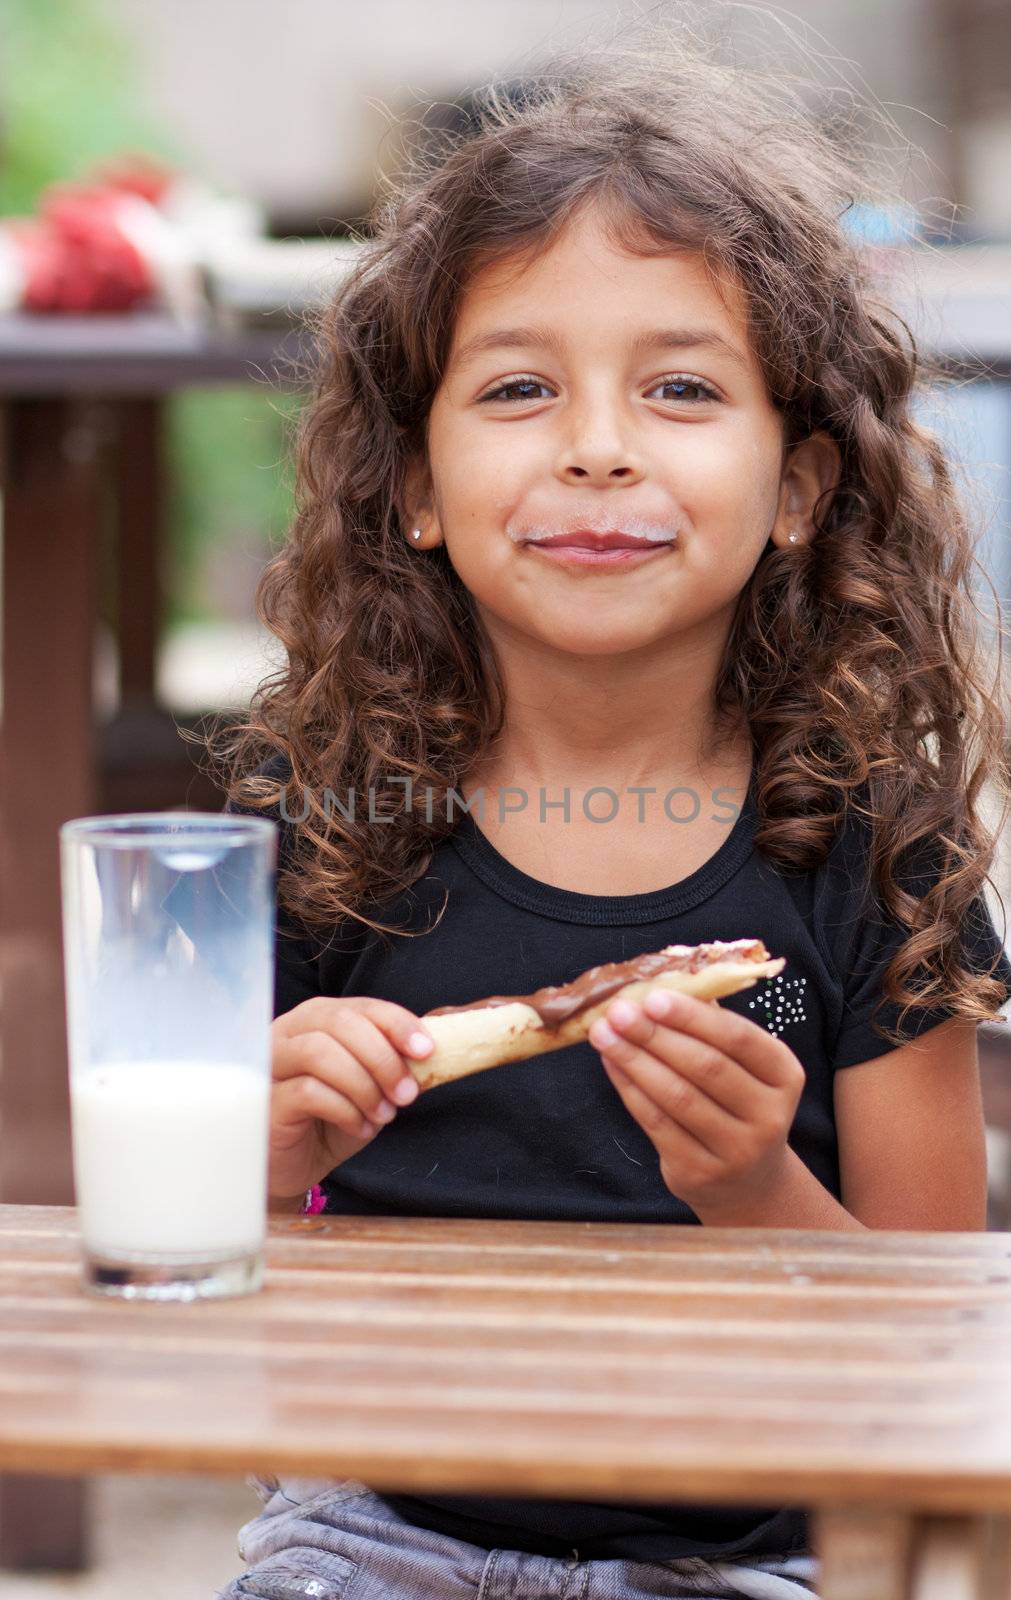 Girl eating a slice of bread and drinking a glass of milk